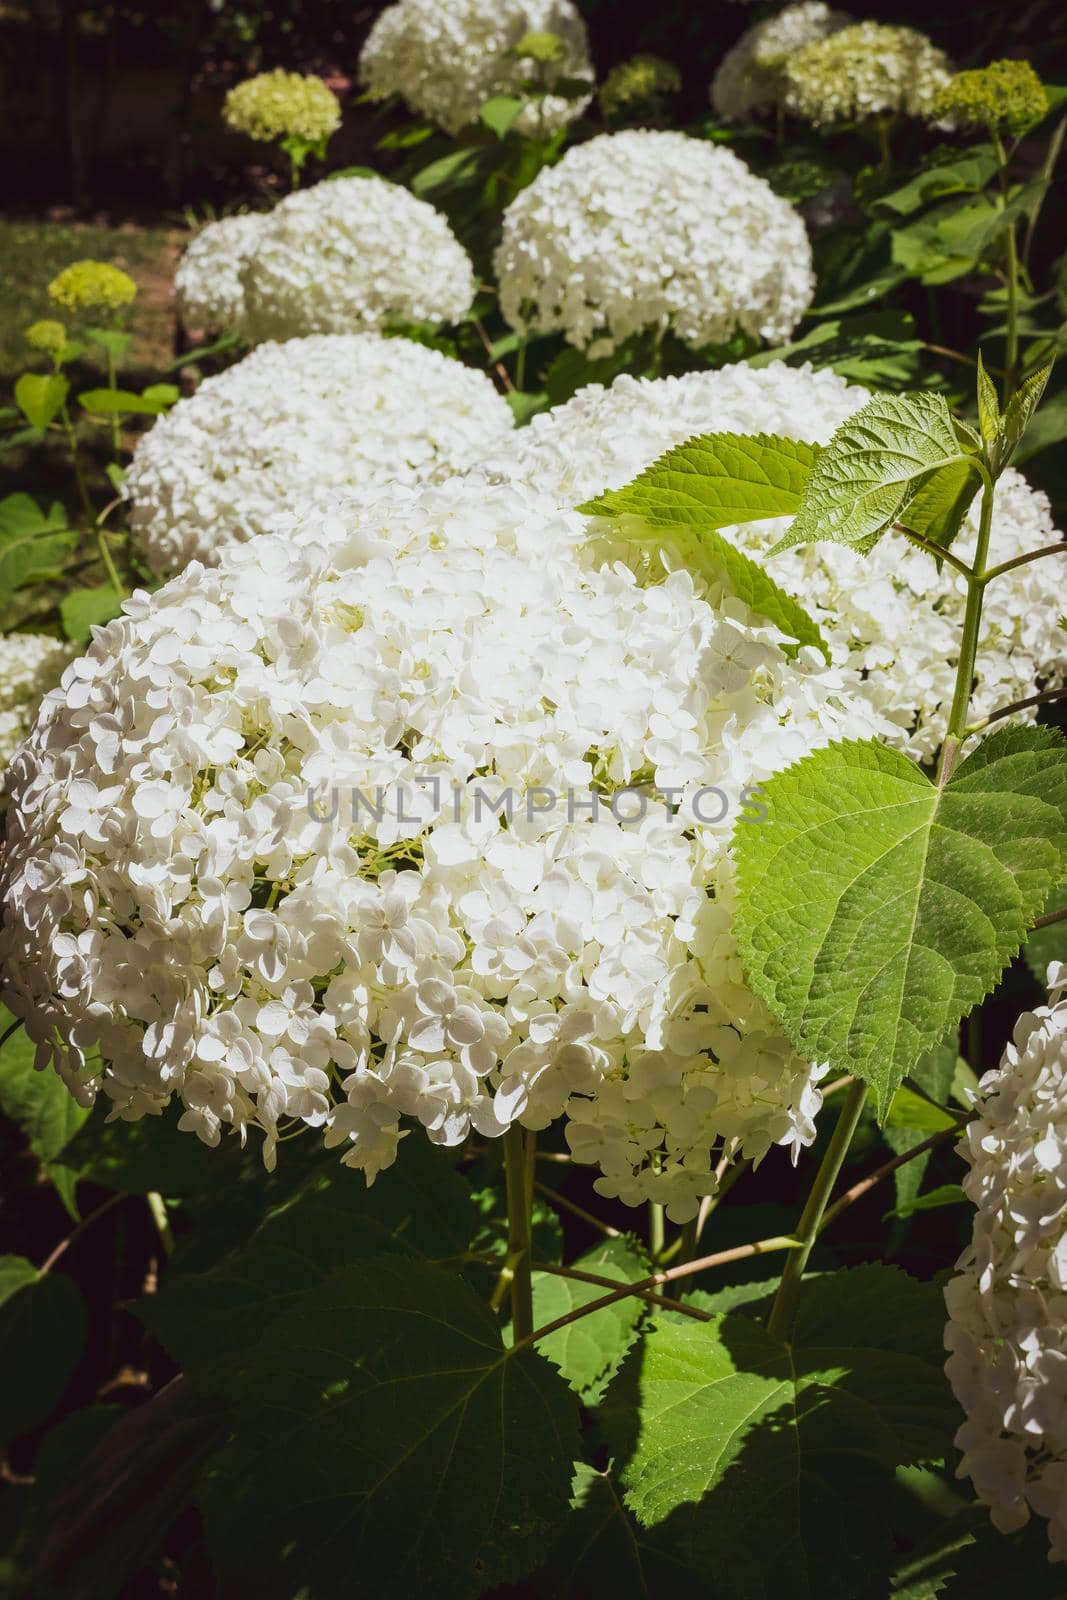 Closeup of a splendid white hydrangea plant, symbol of love, with its characteristic flowers.